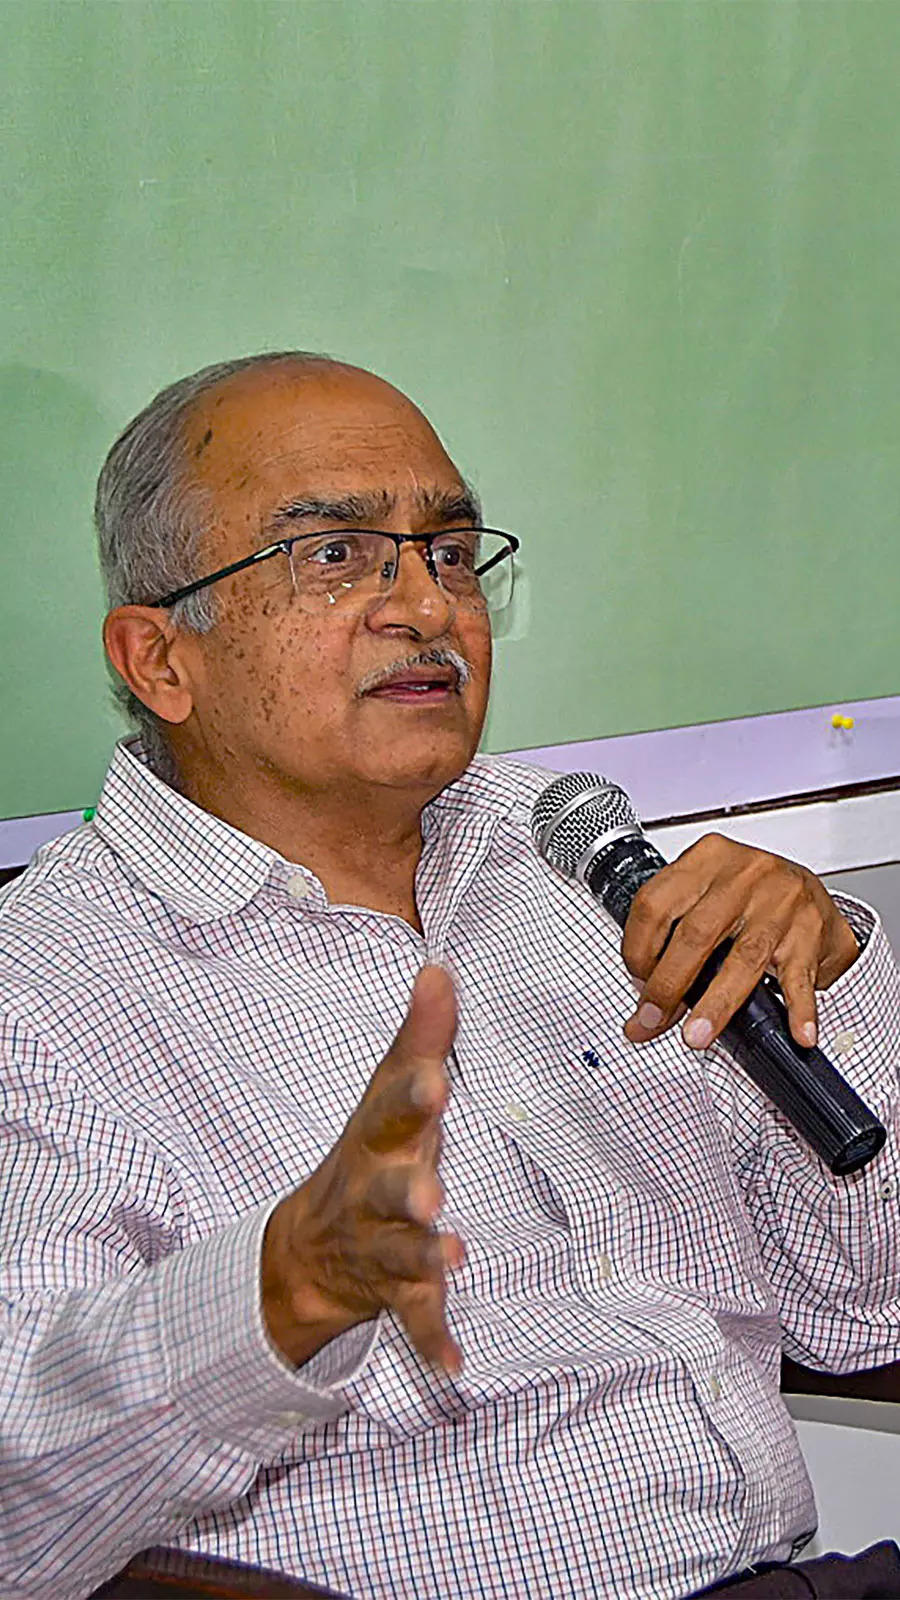 <p>In 1994, Prashant Bhushan co-founded the 'Campaign for Judicial Accountability and Reform' (CJAR), an organization aimed at advocating for transparency and accountability within the Indian judiciary.</p>